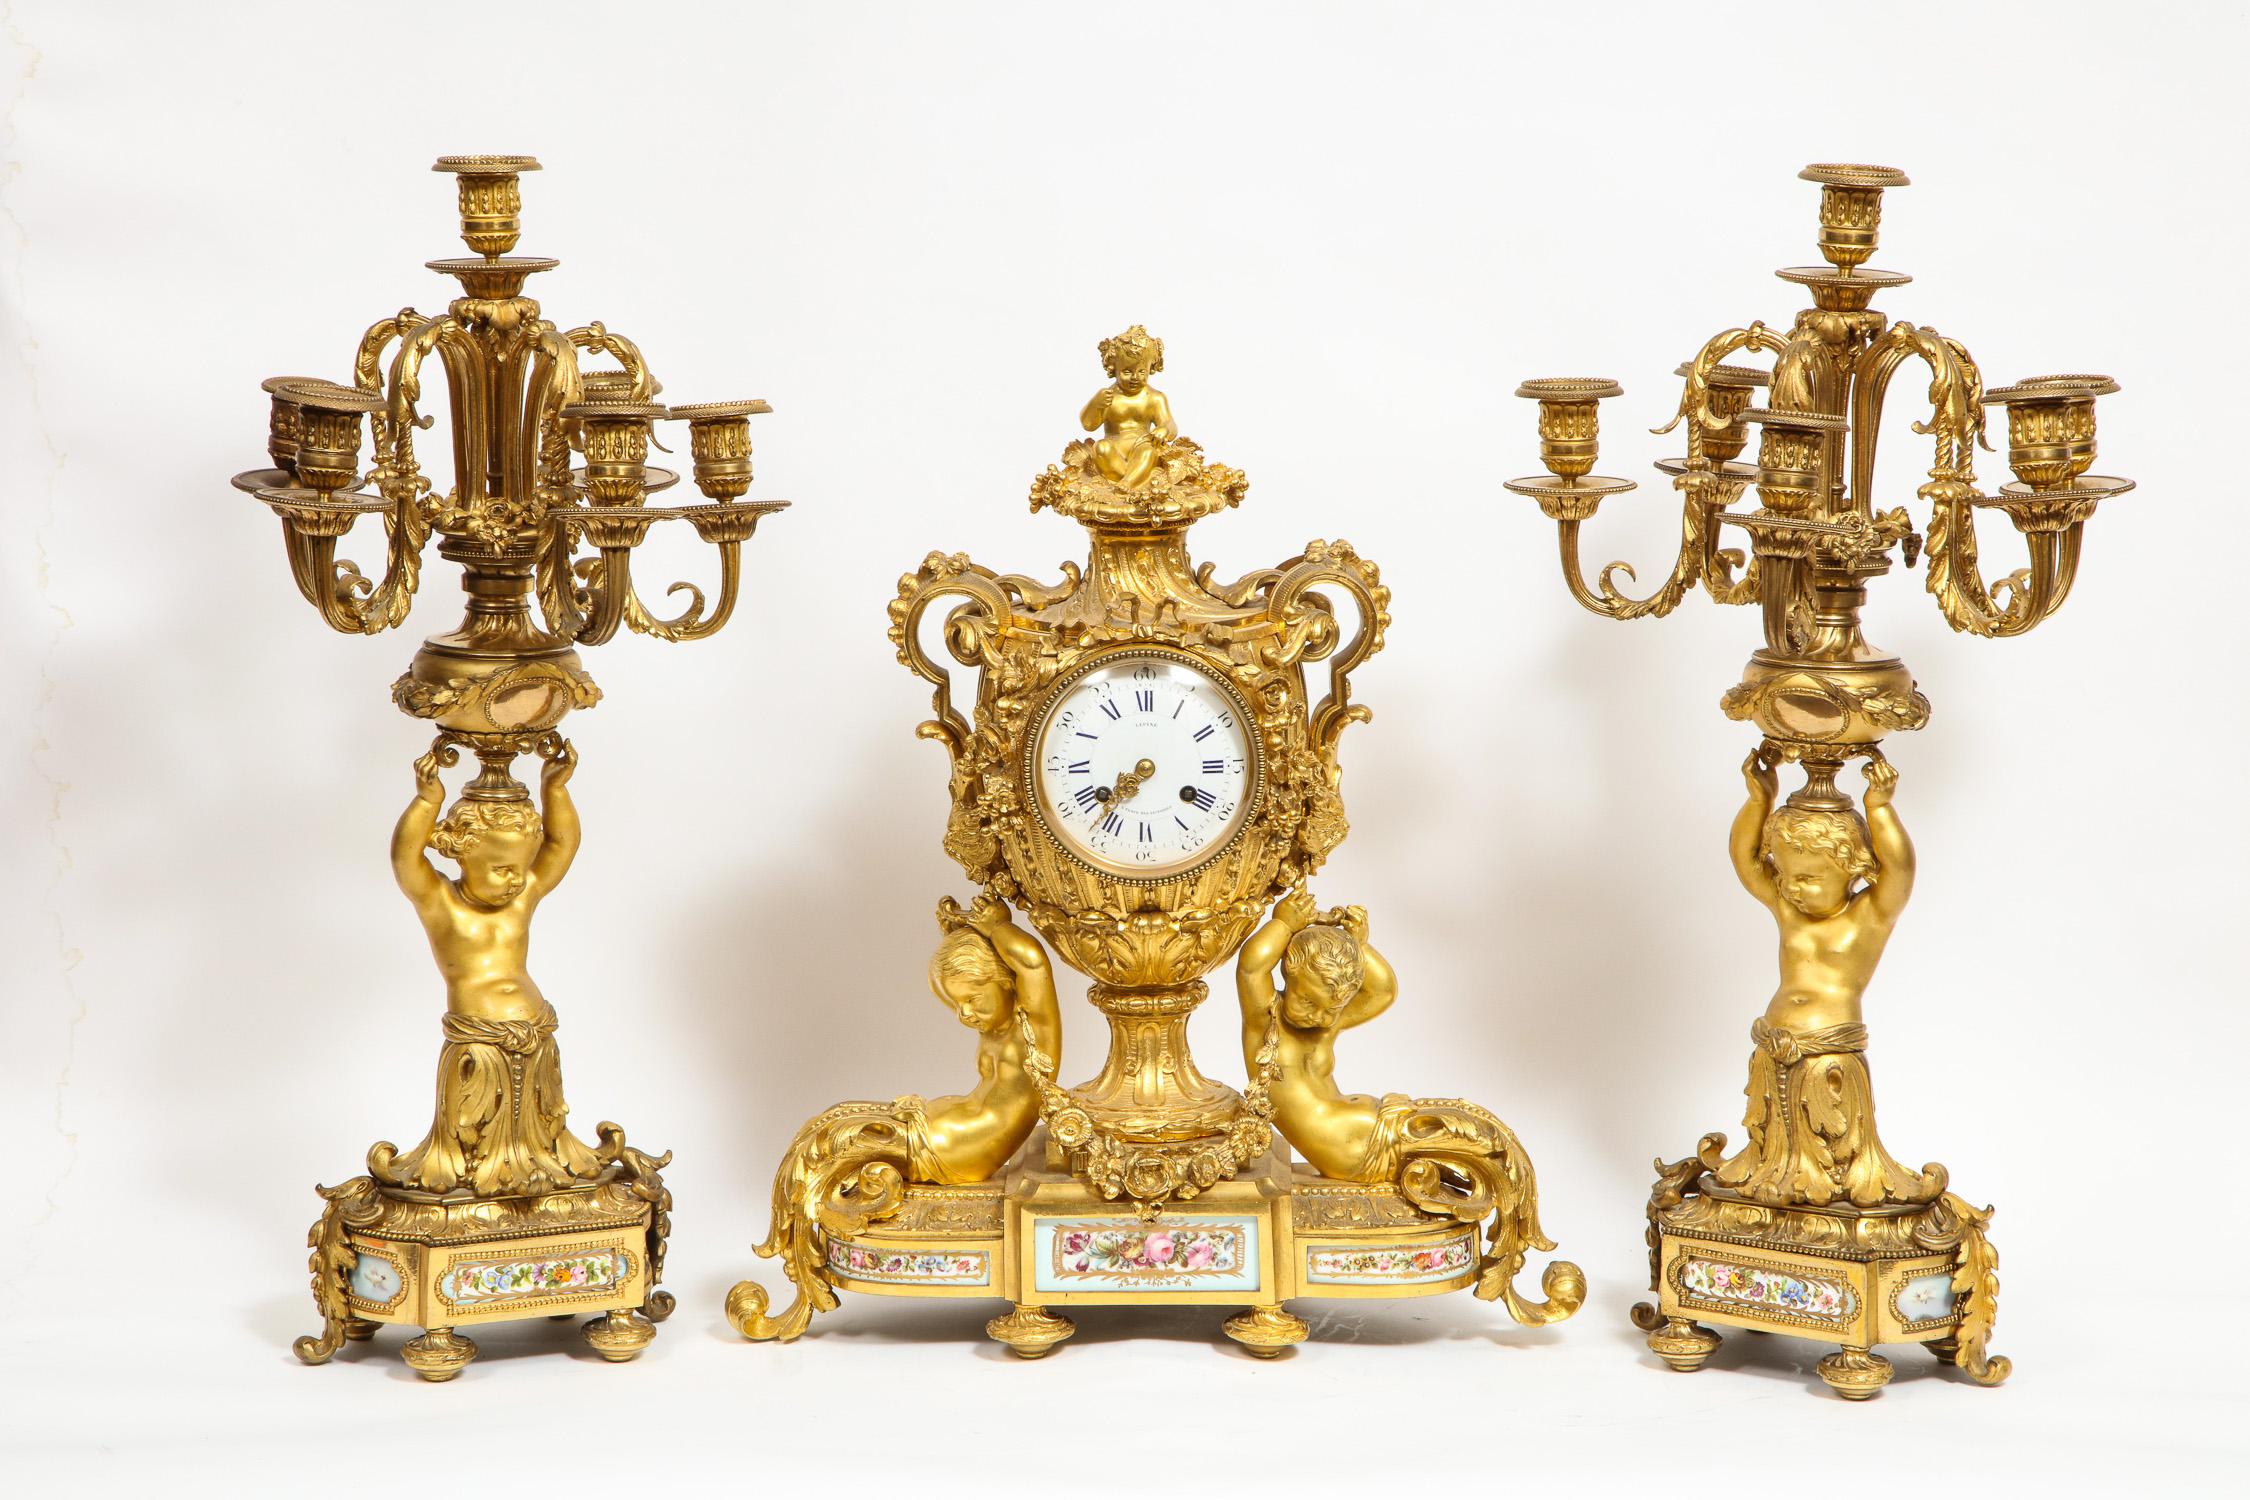 An exceptional quality French bronze / ormolu-mounted teal green porcelain three-piece clock garniture set, circa 1880

By Lepine, Paris.

Dial and movement both signed Lepine.

Comprising of a clock and a pair of matching candelabra.
 
The